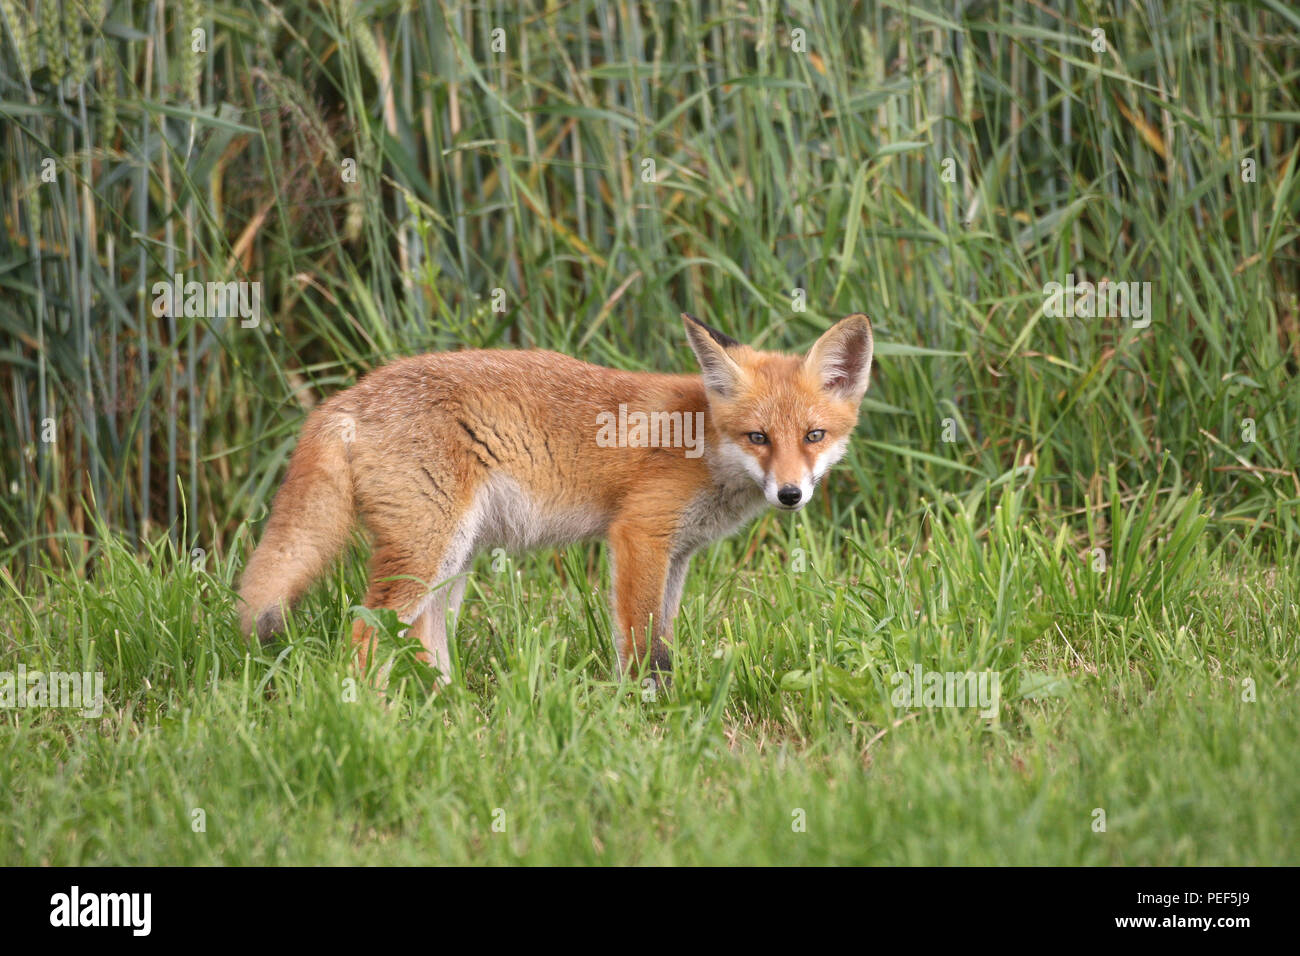 Jungfuchs (Vulpes vulpes) in front of a wheat field, Bavaria, Germany Stock Photo